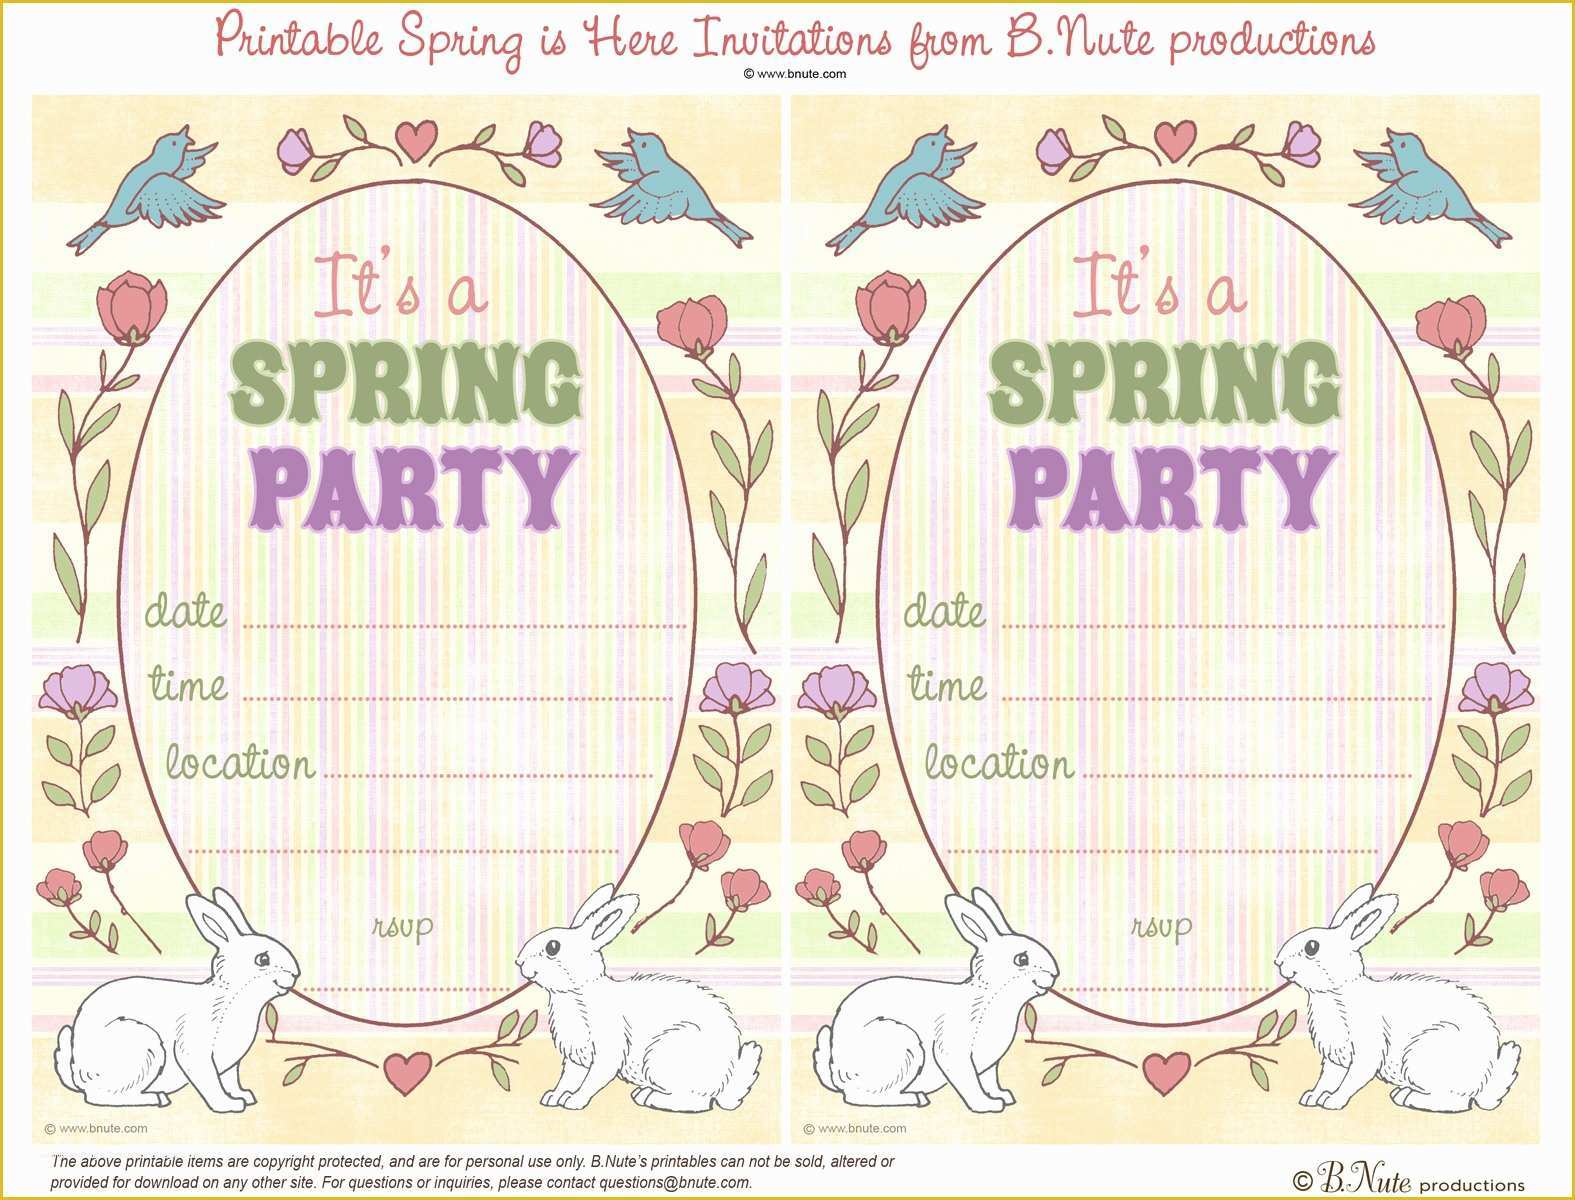 Spring Party Invitation Templates Free Of Bnute Productions Free Printable Spring is Here Easter